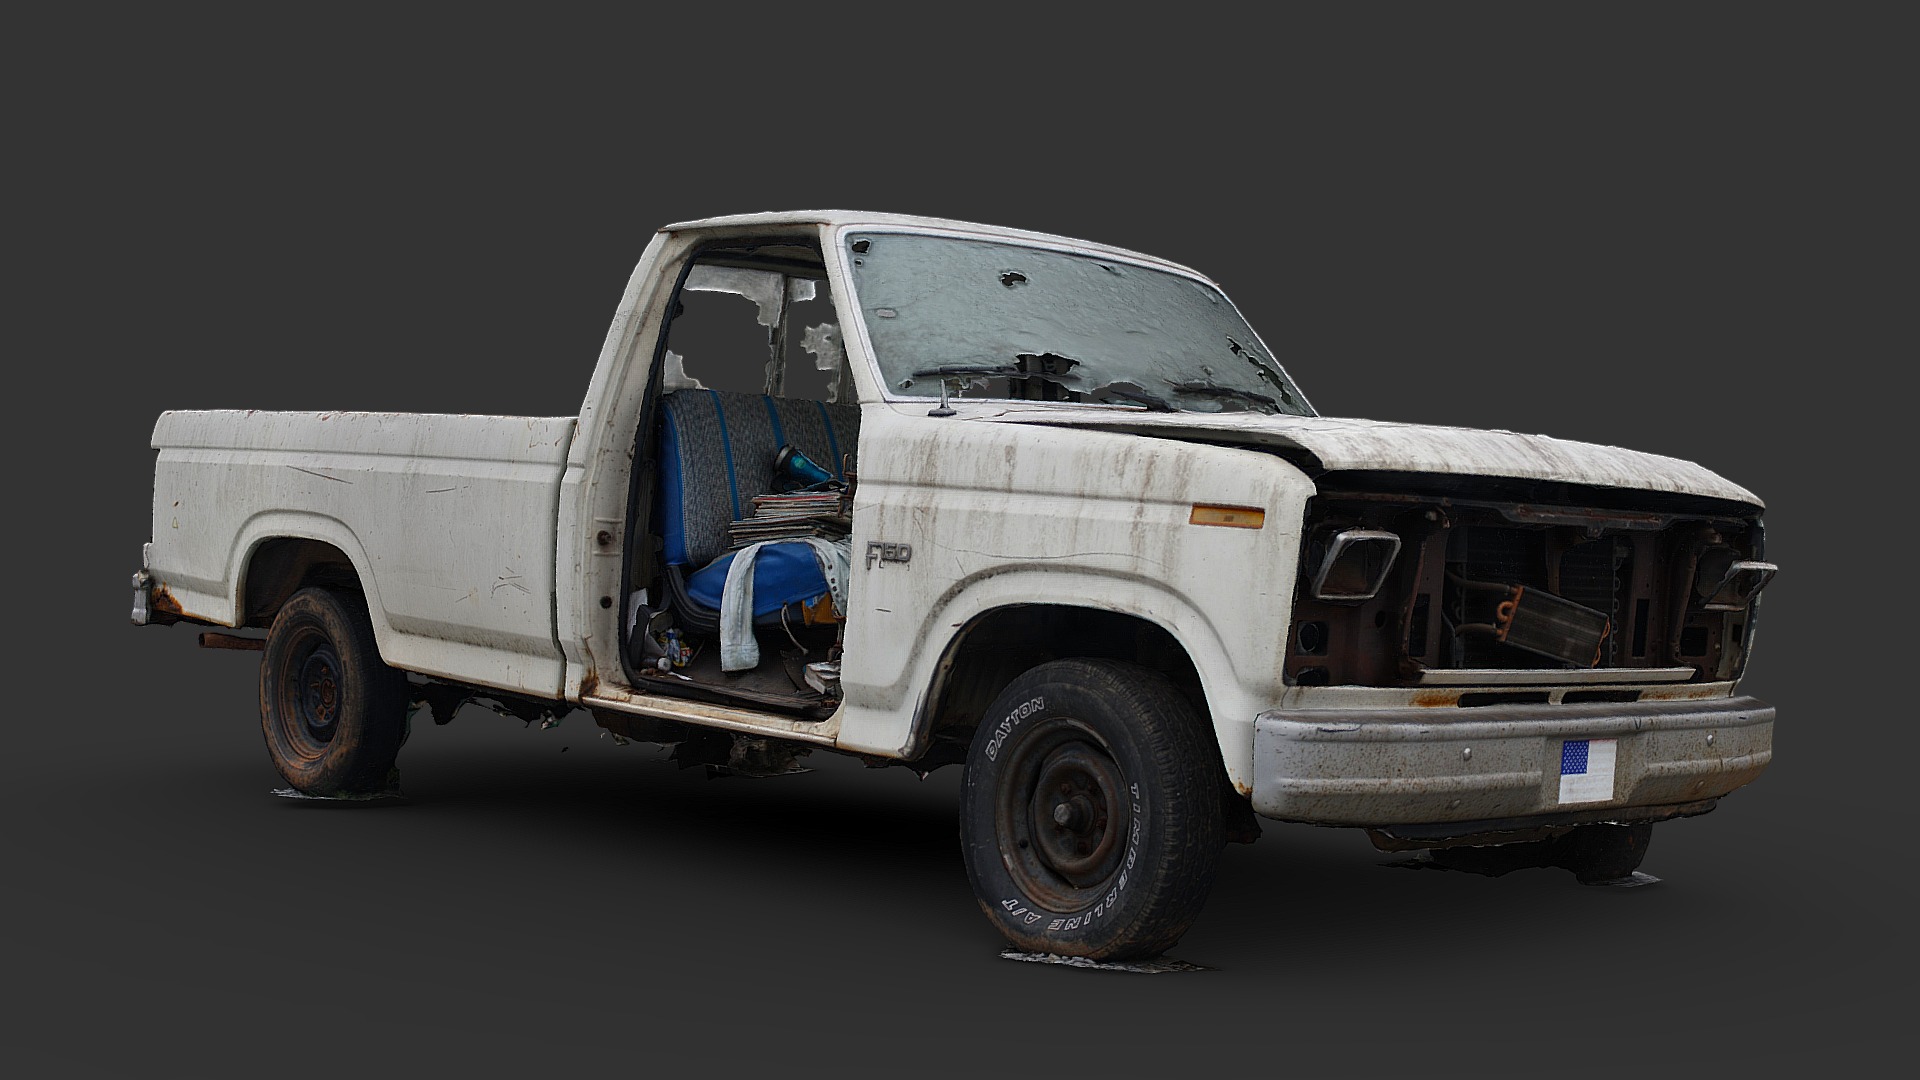 3D model Vandalized Truck (Raw Scan) - This is a 3D model of the Vandalized Truck (Raw Scan). The 3D model is about a white truck with a blue seat.